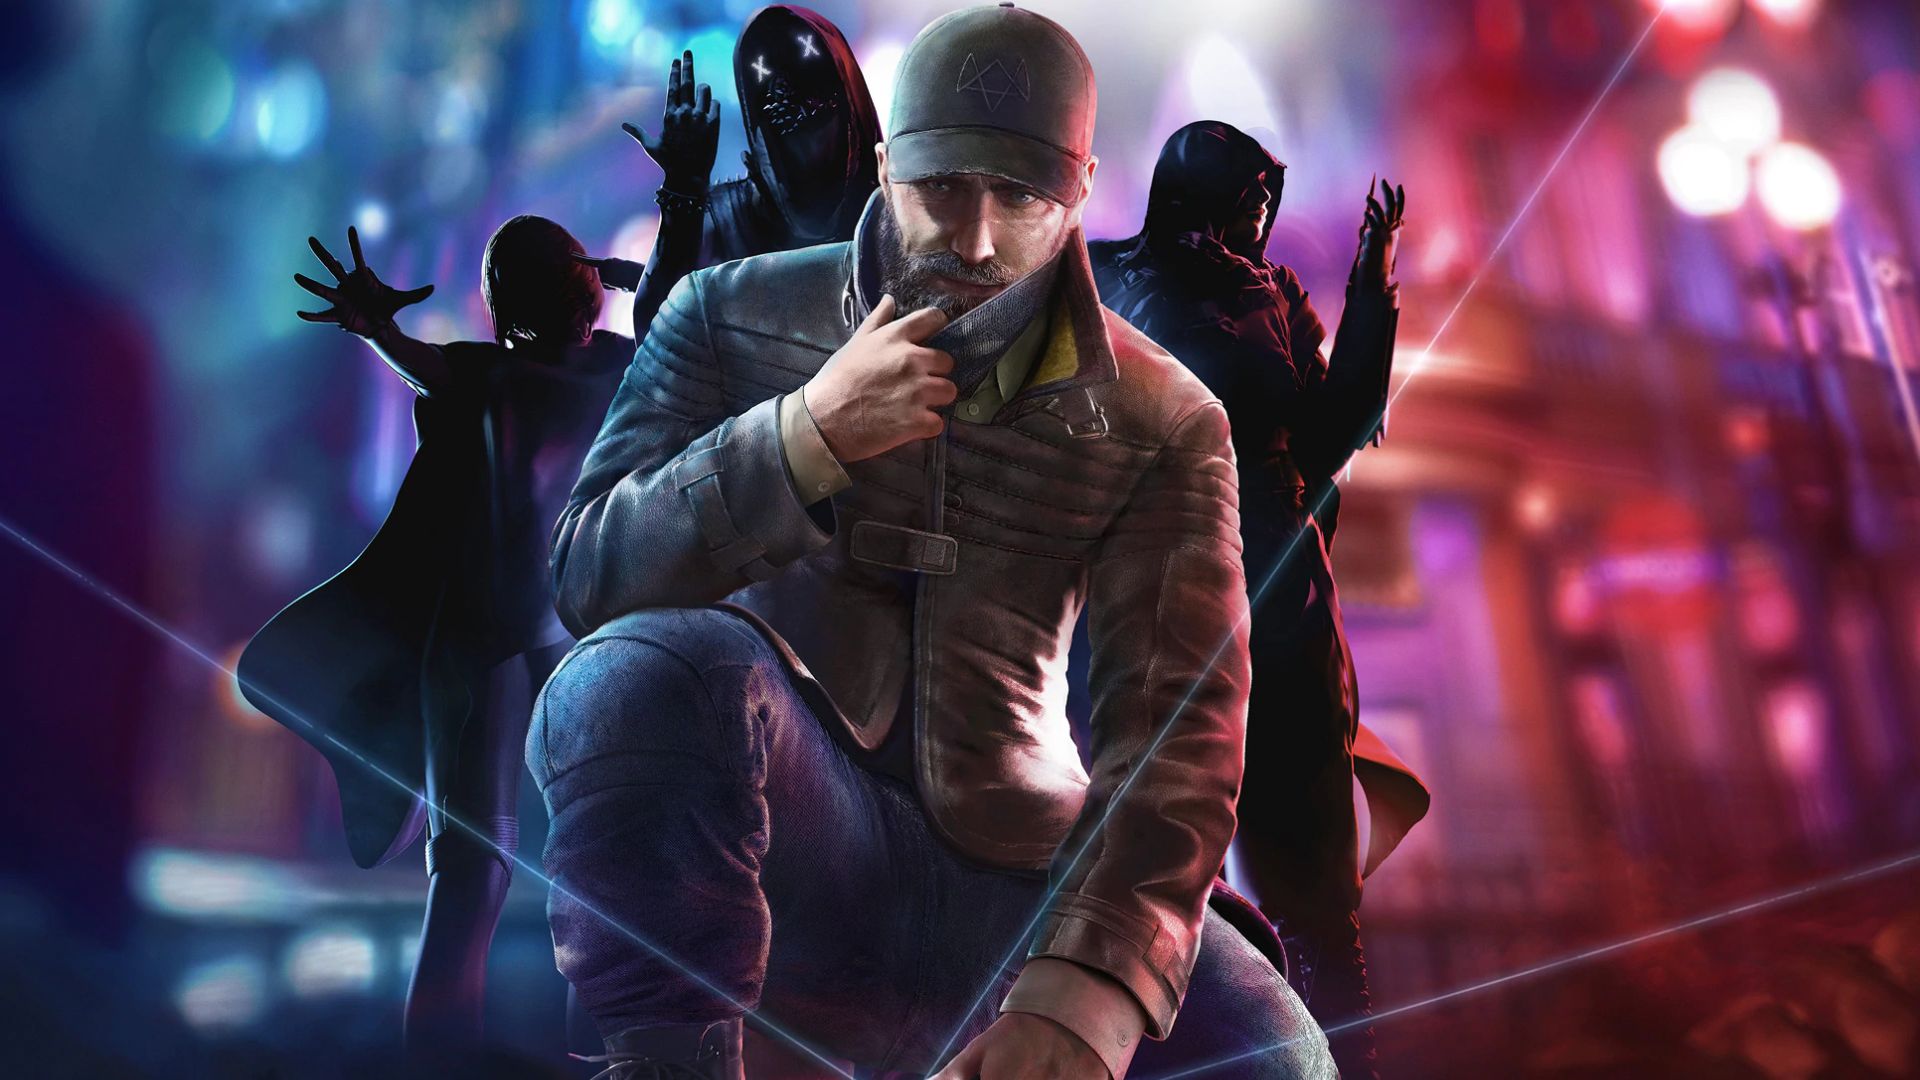 Watch Dogs: Legion Behind The Scenes Video Has Aiden And Wrench Actors Speak On Their Return